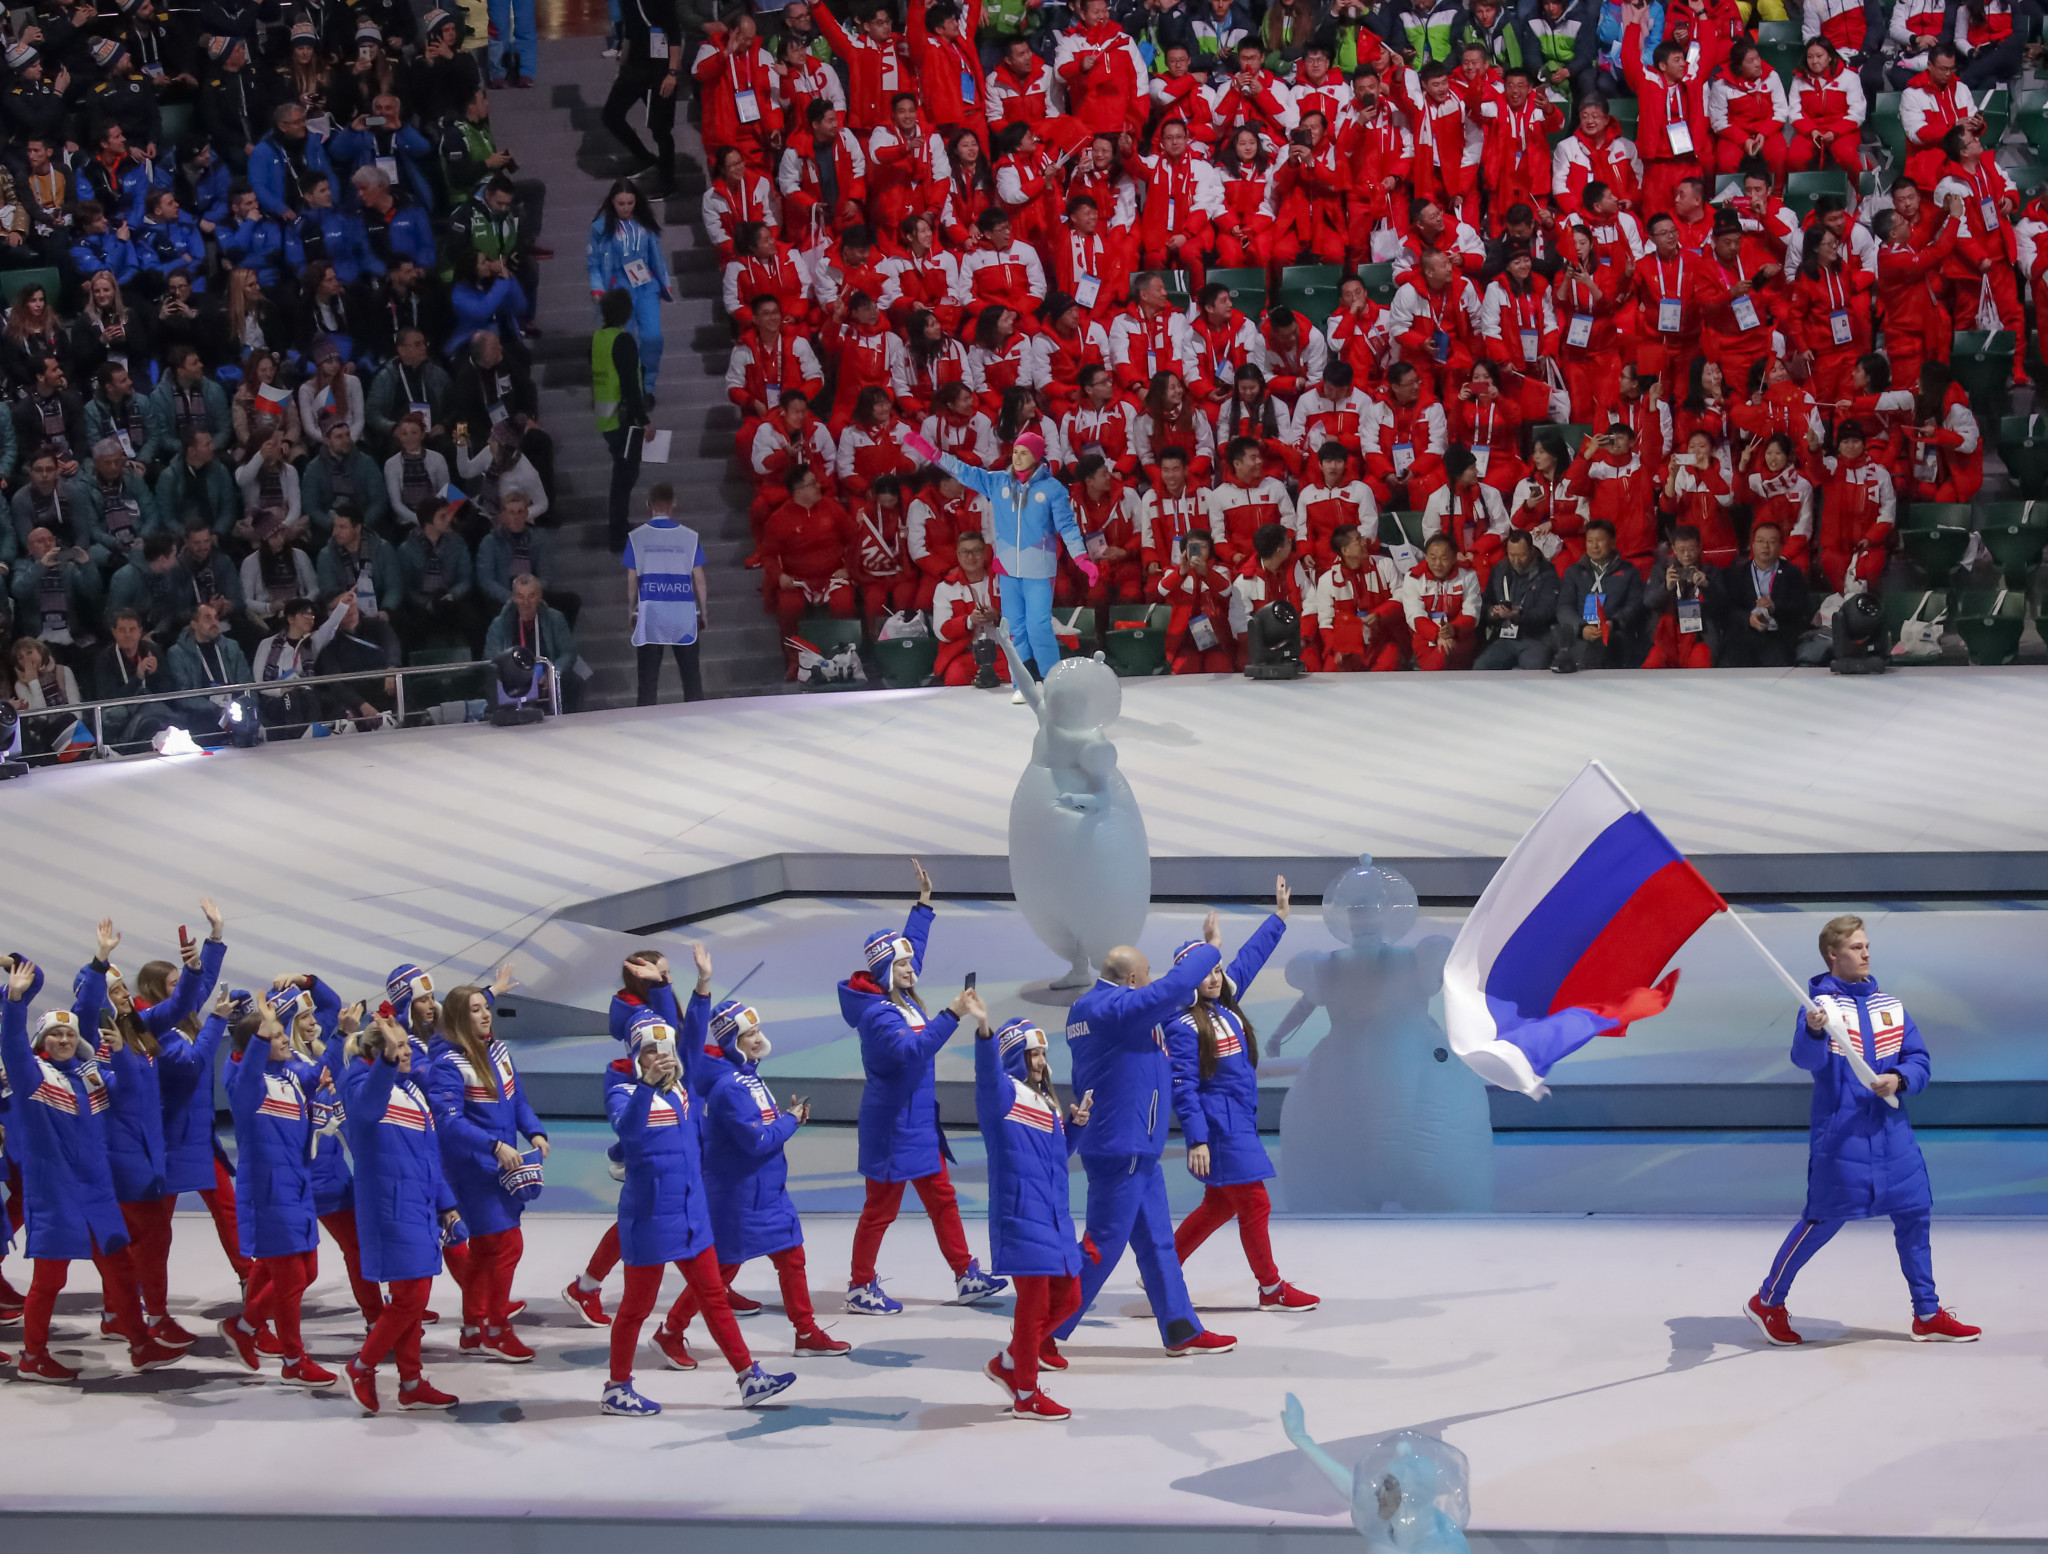 Exclusive: Saintrond calls for patience before decision on Russian participation at future FISU events